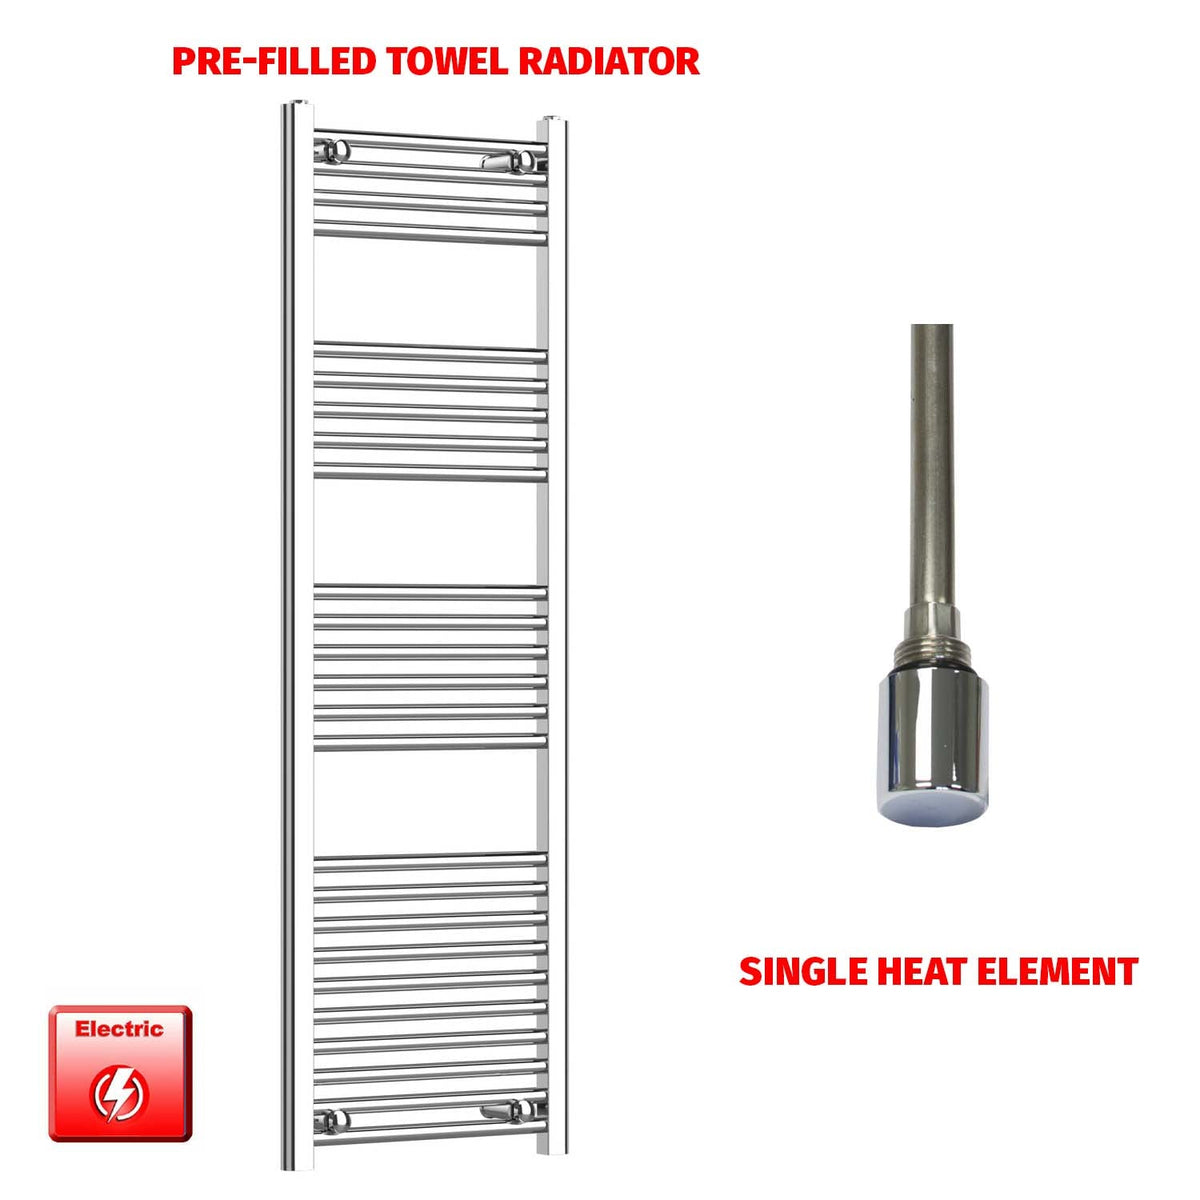 1400mm High 450mm Wide Pre-Filled Electric Heated Towel Radiator Straight Chrome Single heat element no timer